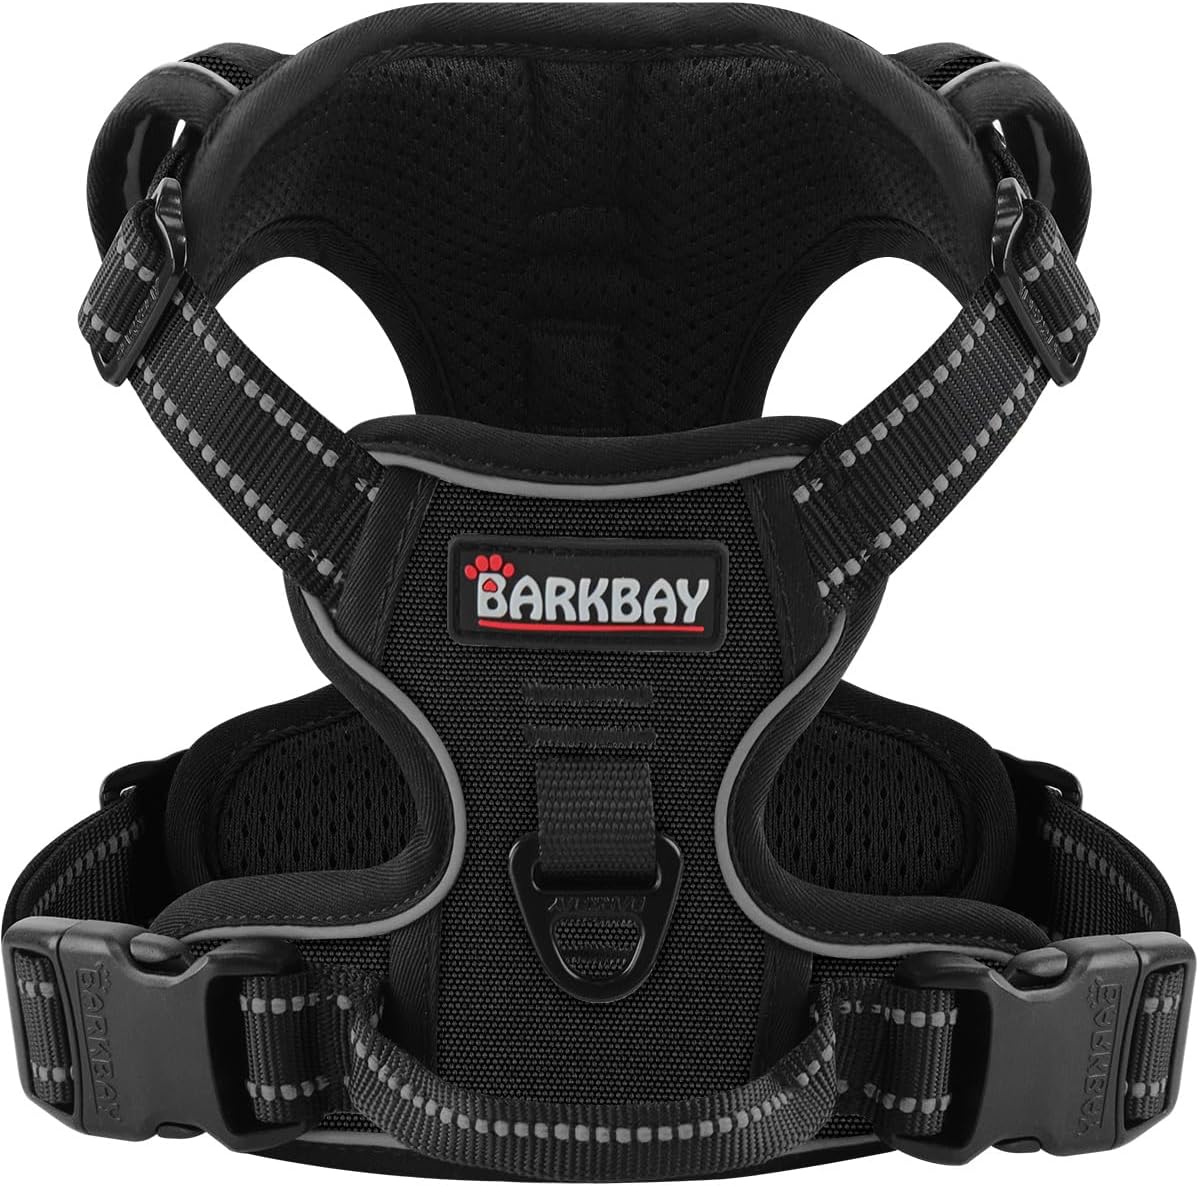 BARKBAY Dog Harness No Pull for Large Dogs - Adjustable, Reflective, Comfortable, No Choke, Heavy-Duty - Perfect for Outdoor Training, Walking, and Hiking - Strong  Durable - L  Black